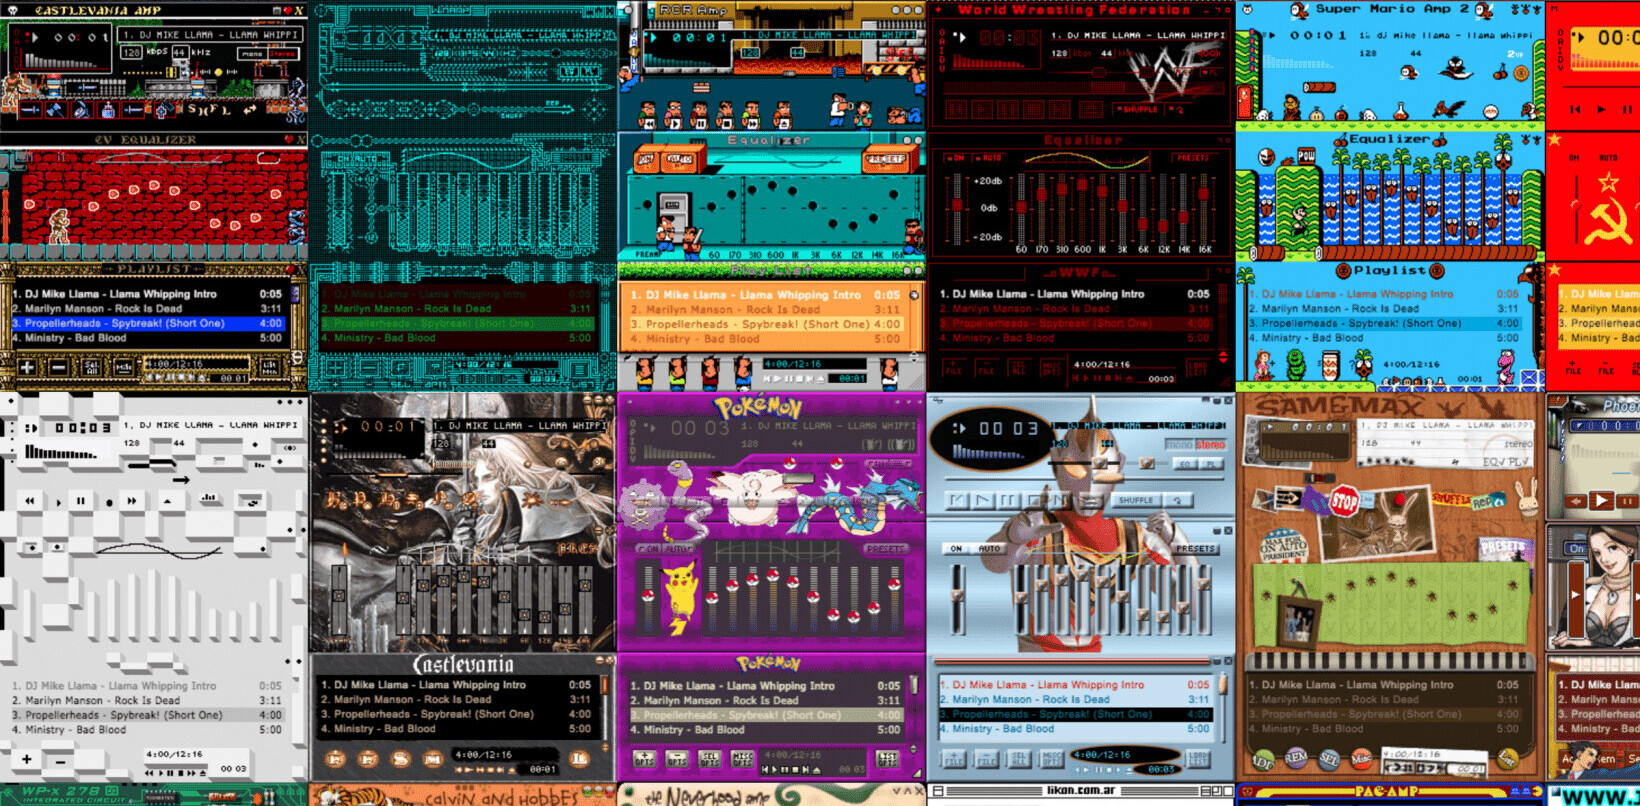 The Winamp Skin Museum is a beautiful homage to an iconic piece of software